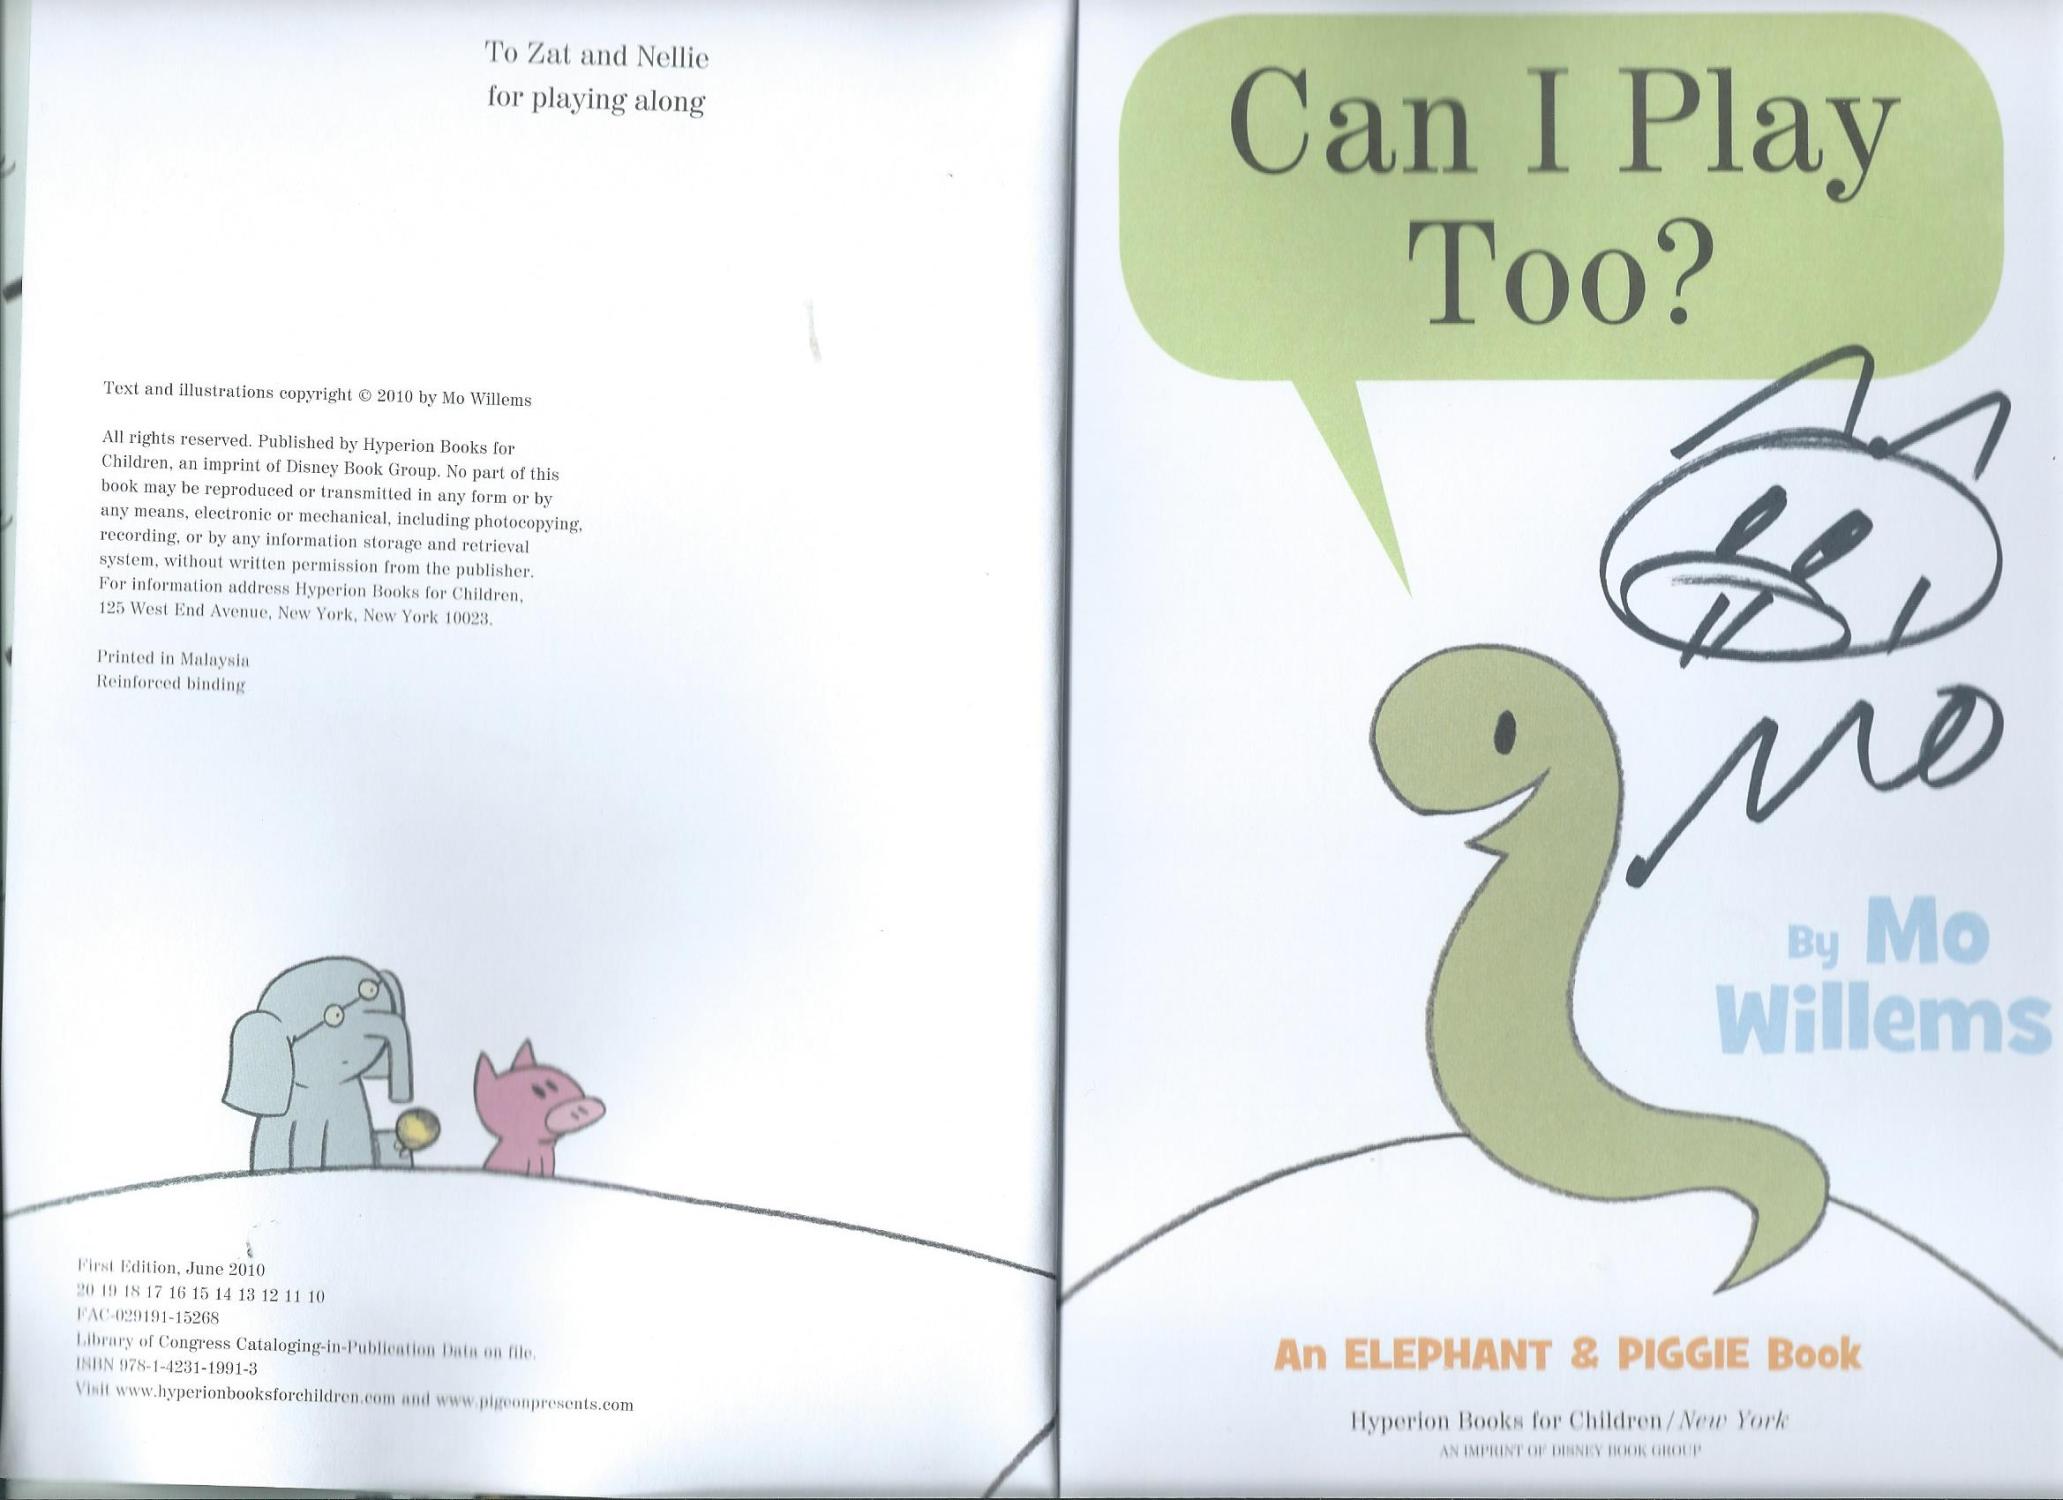 can-i-play-too-an-elephant-and-piggie-book-by-willems-mo-as-new-hardcover-2010-signed-by